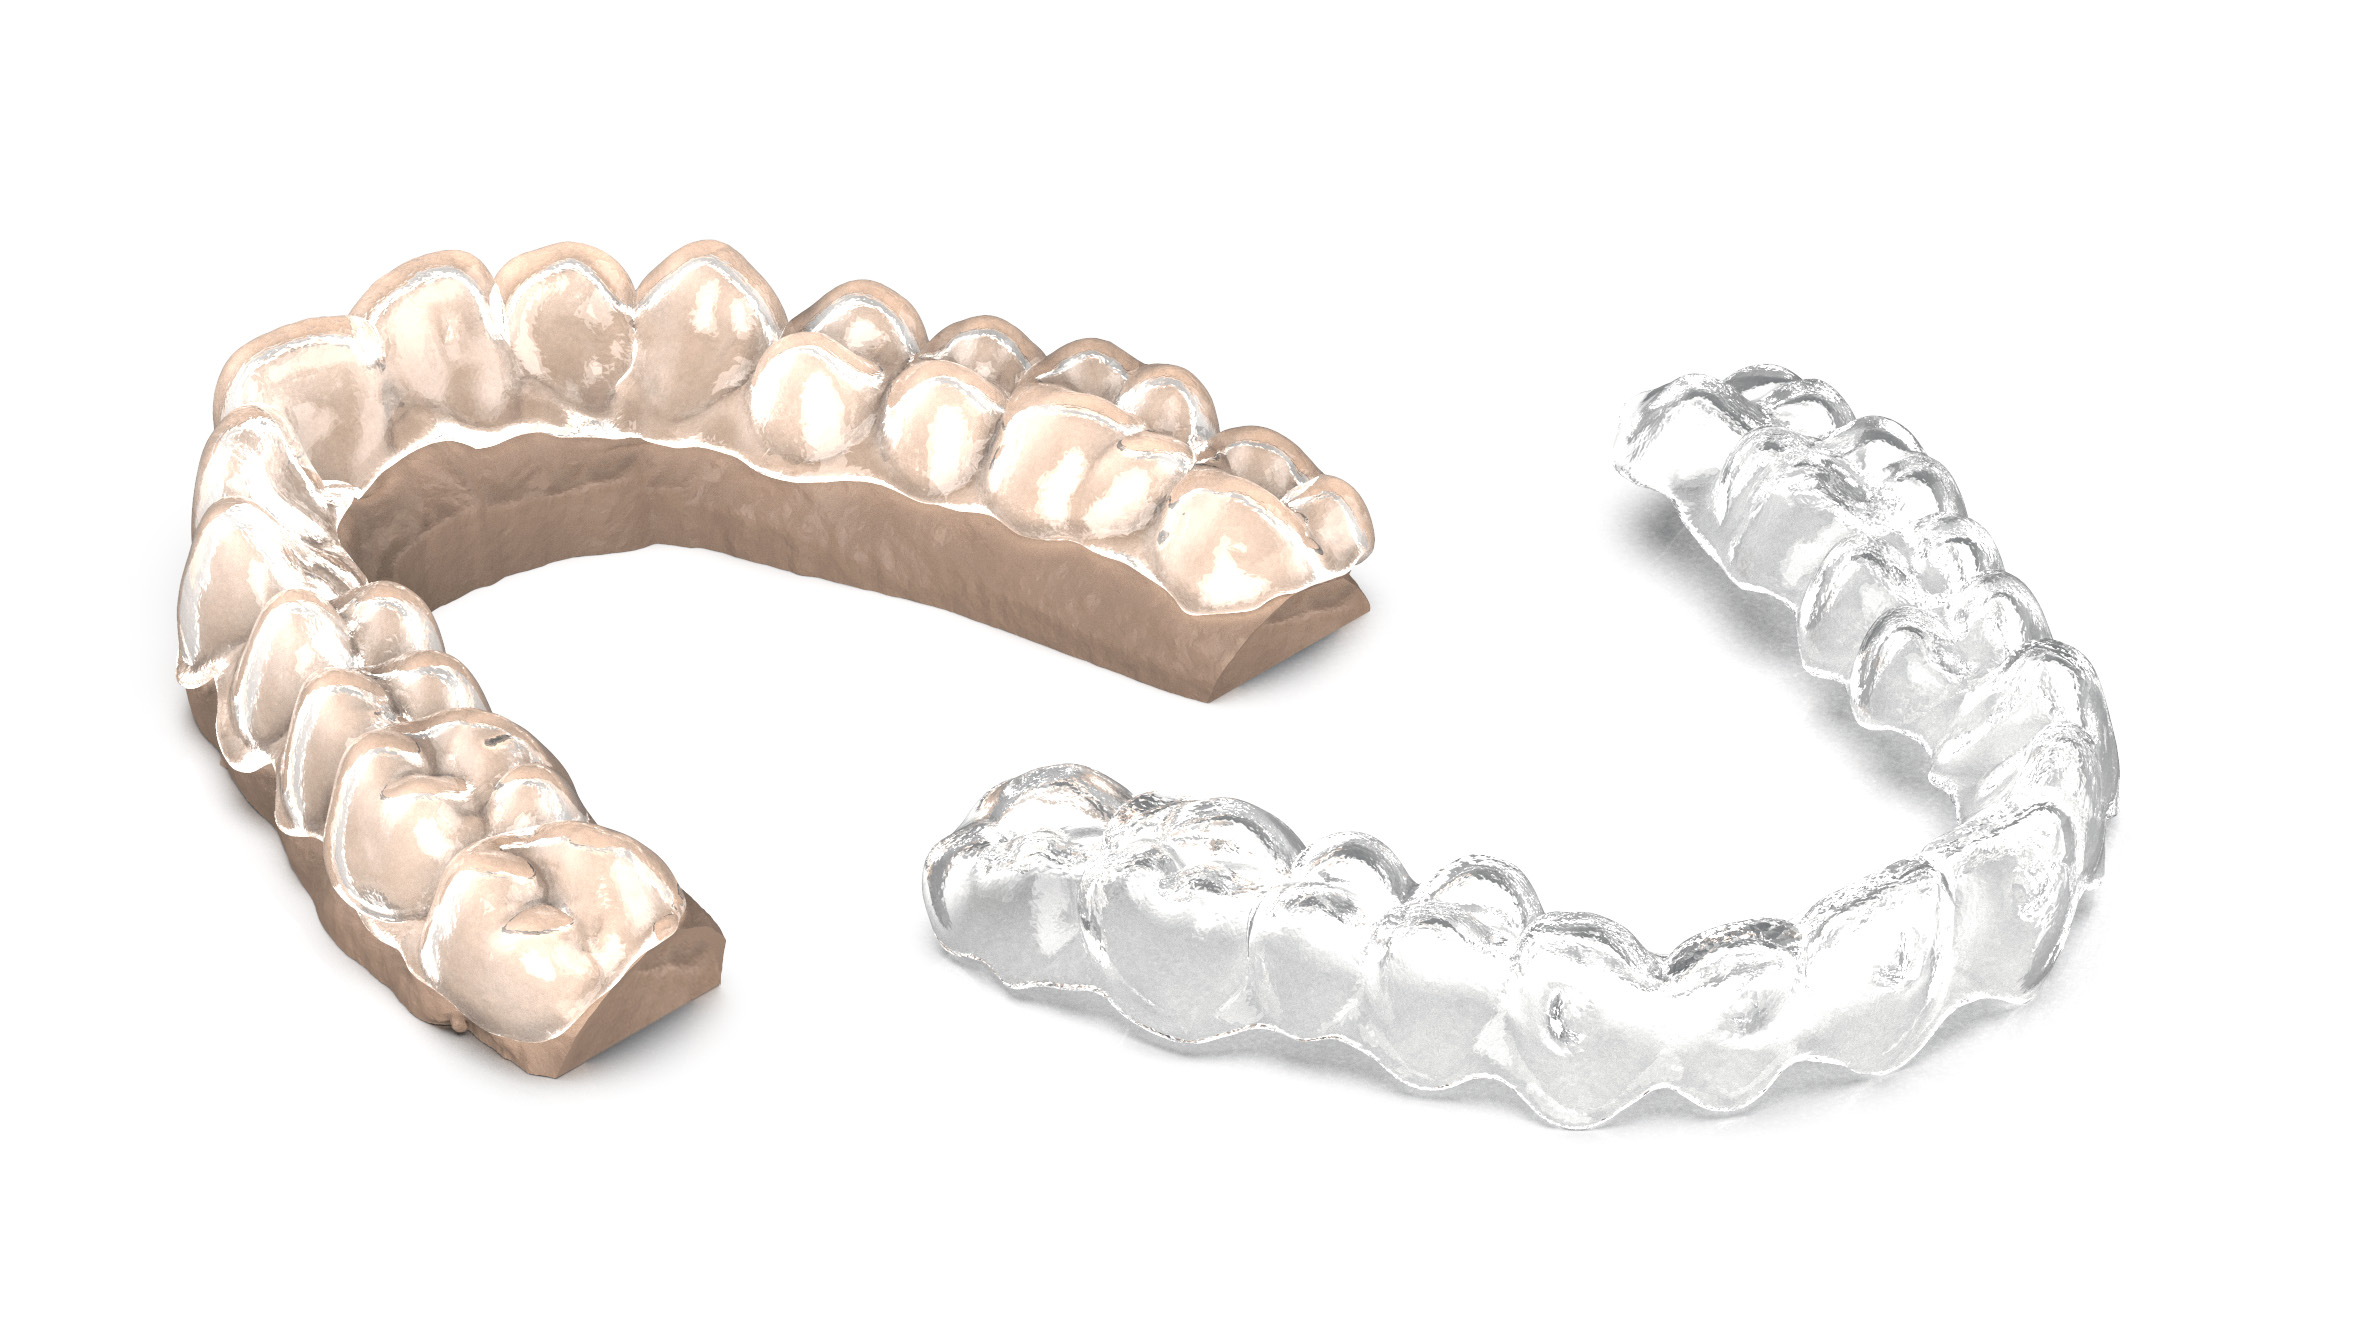 3D Print Clear Aligners